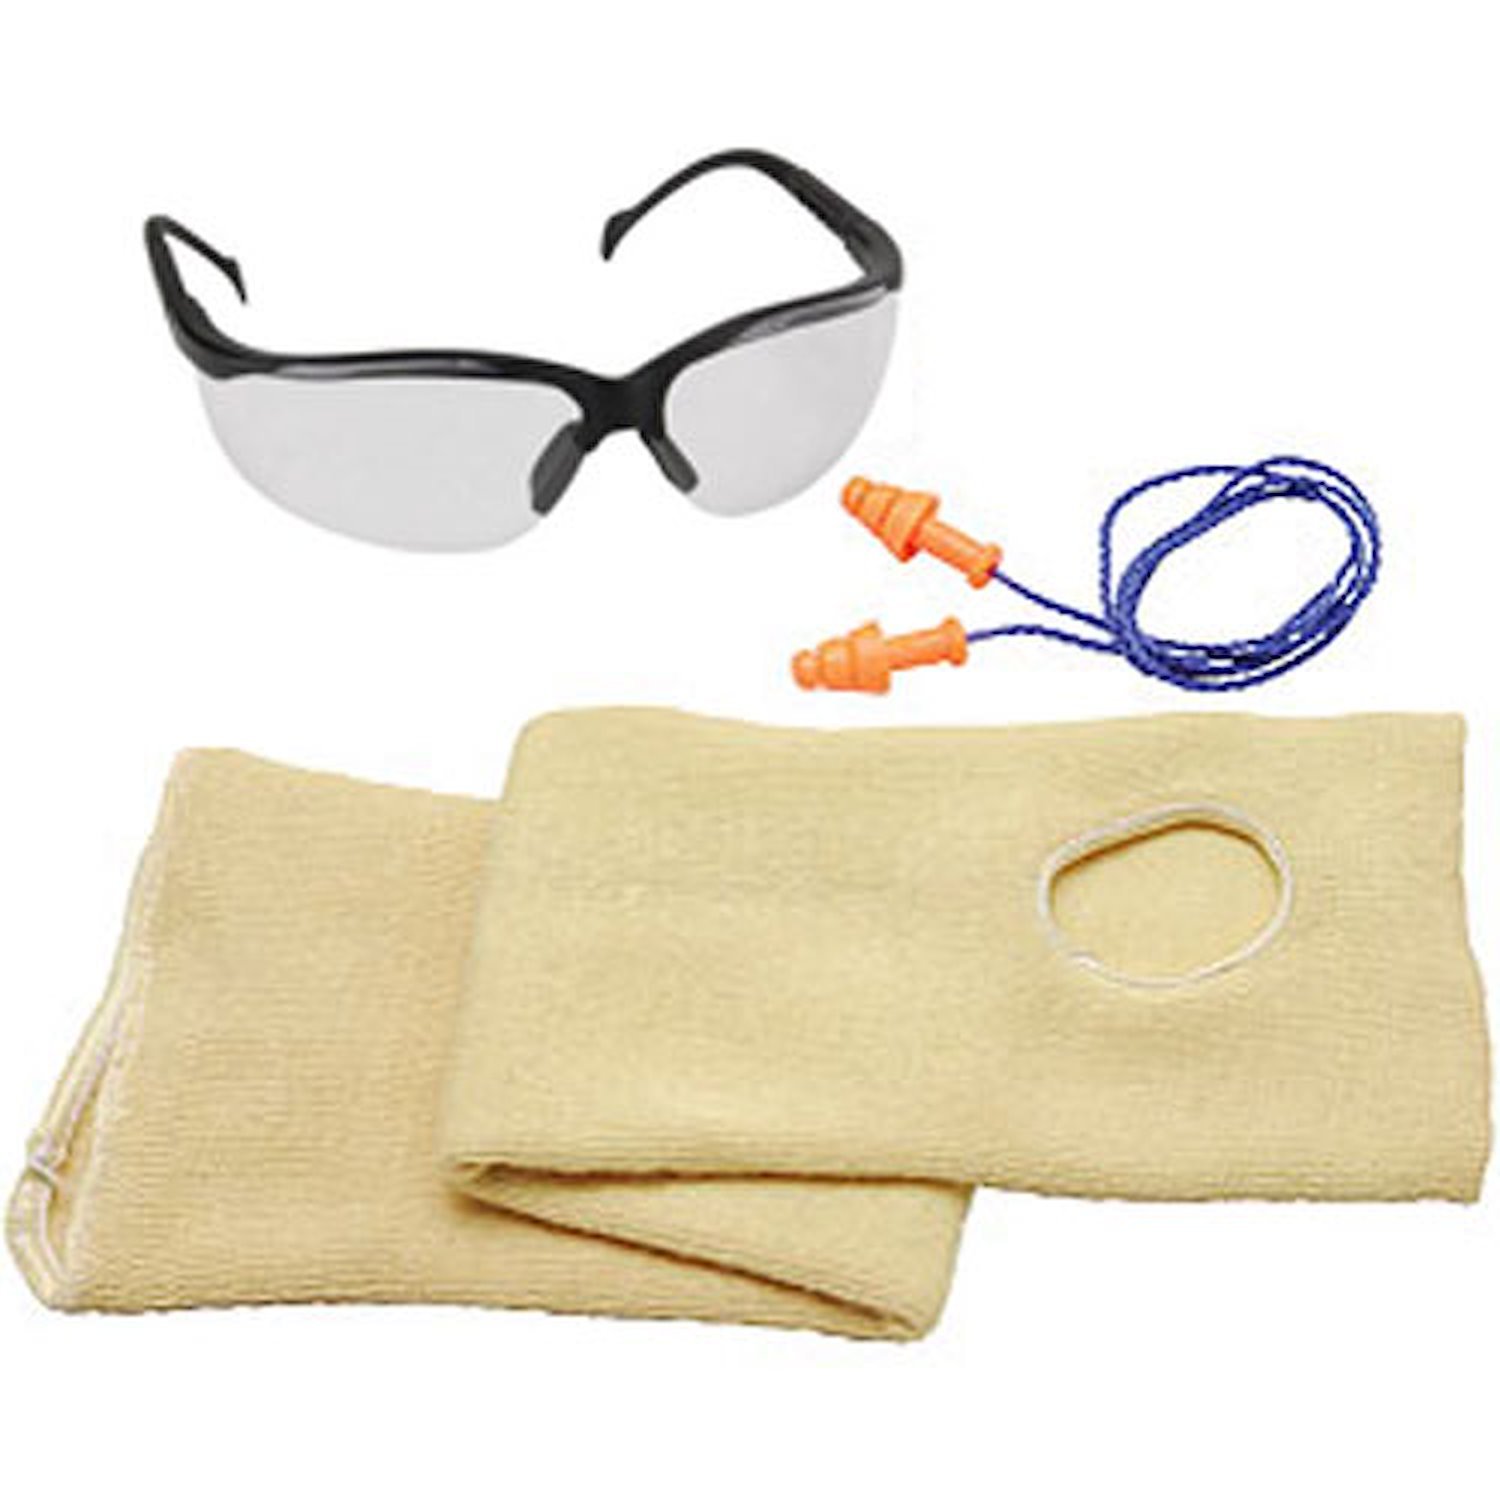 Pit Crew Safety Kit Includes: Safety Glasses